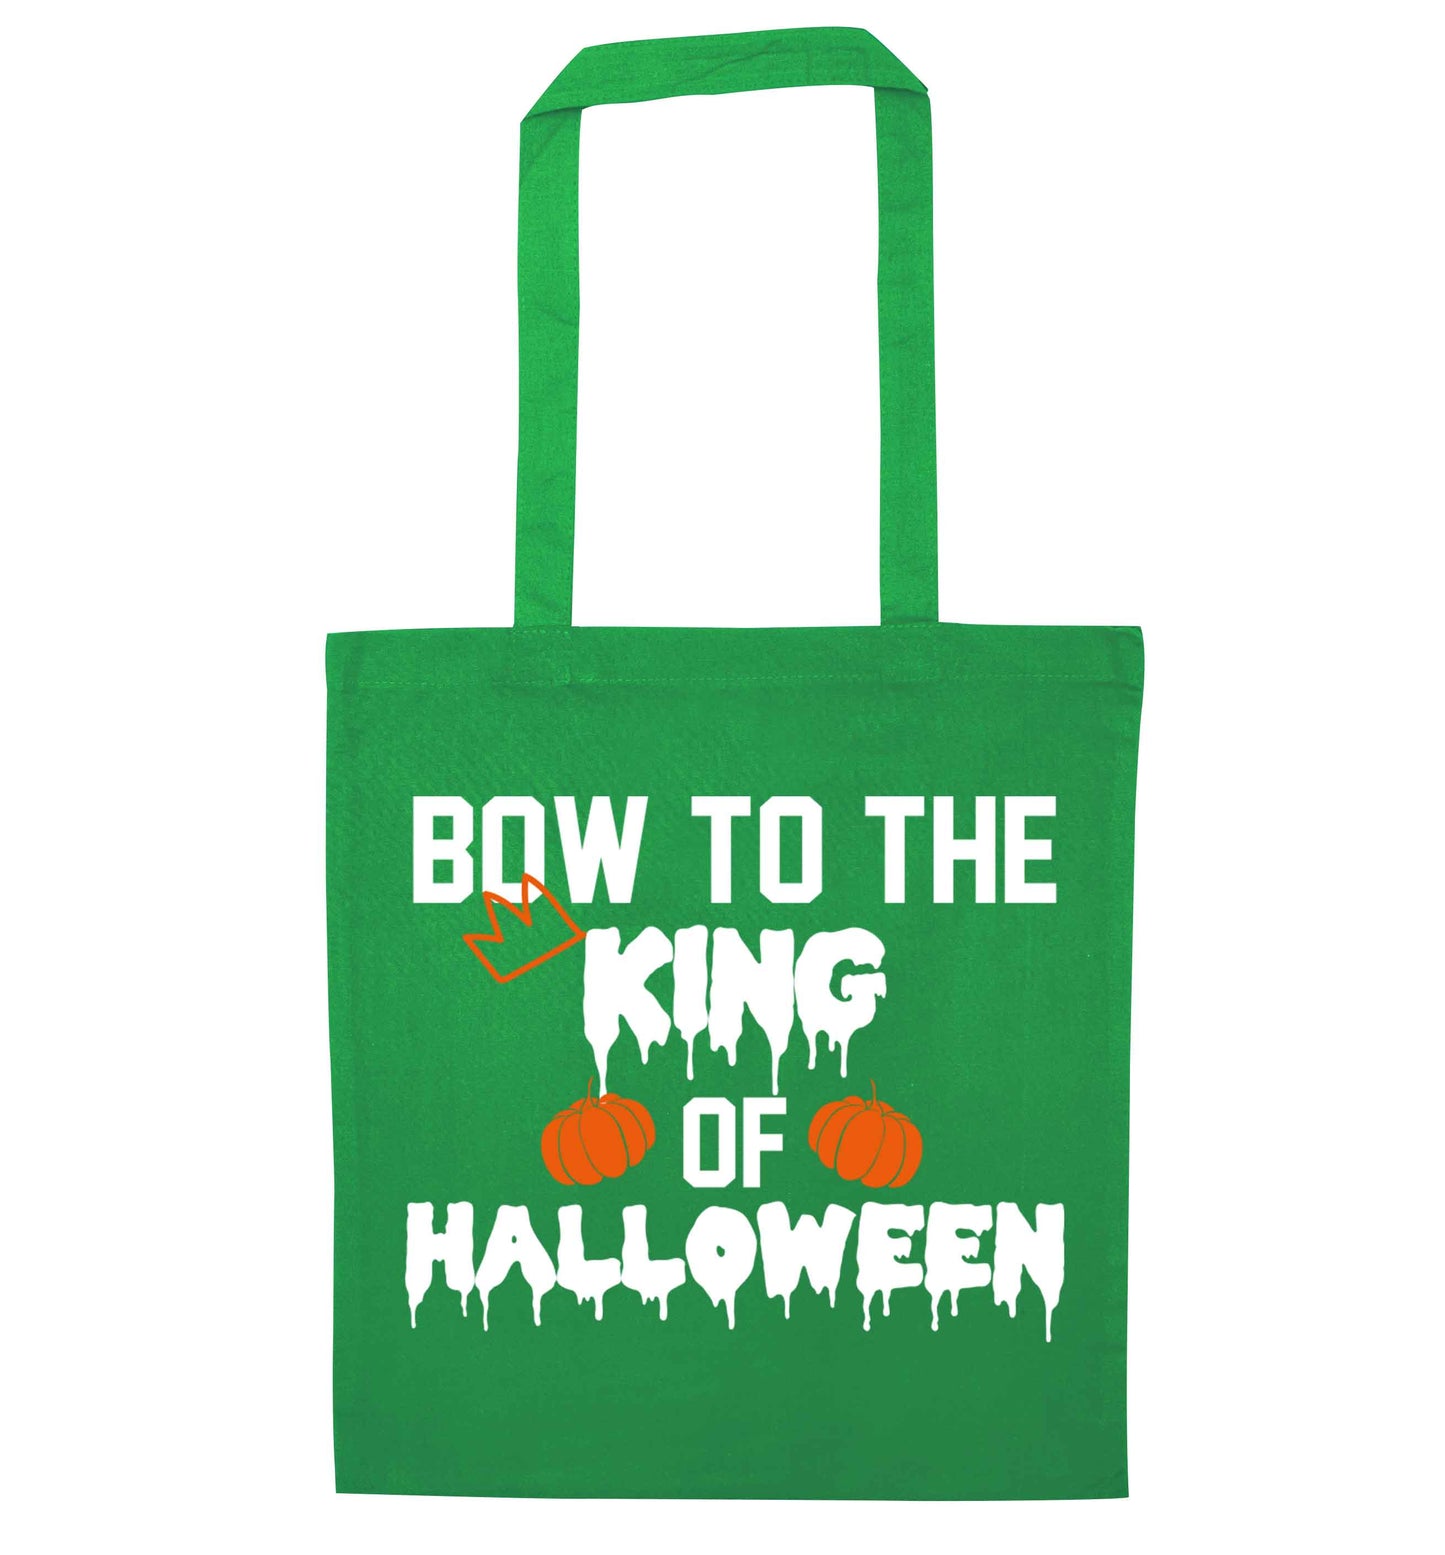 Bow to the King of halloween green tote bag